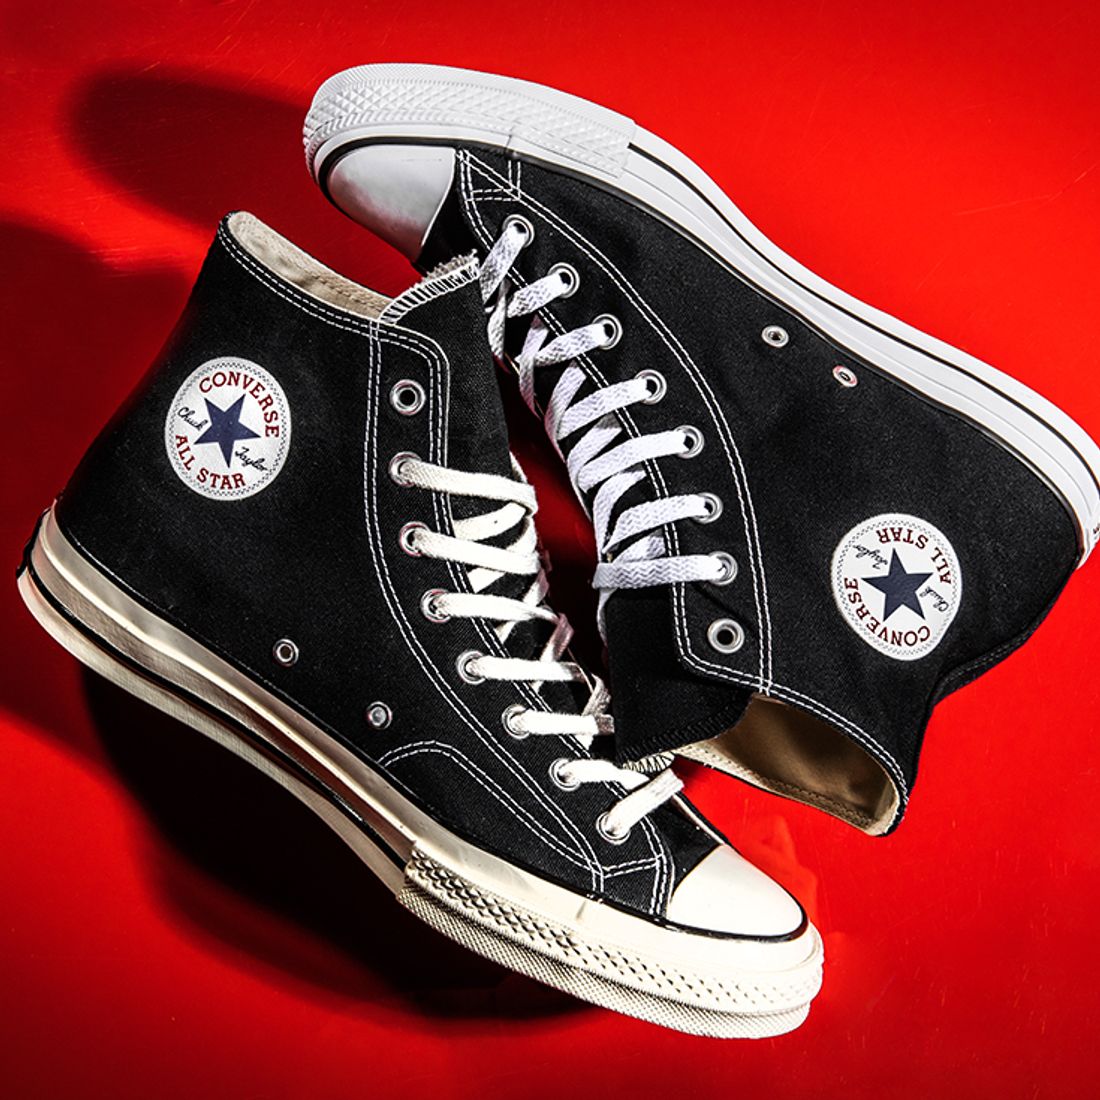 Converse Chuck Taylor Vs. Chuck 70: Breaking the Differences - Sneaker Freaker